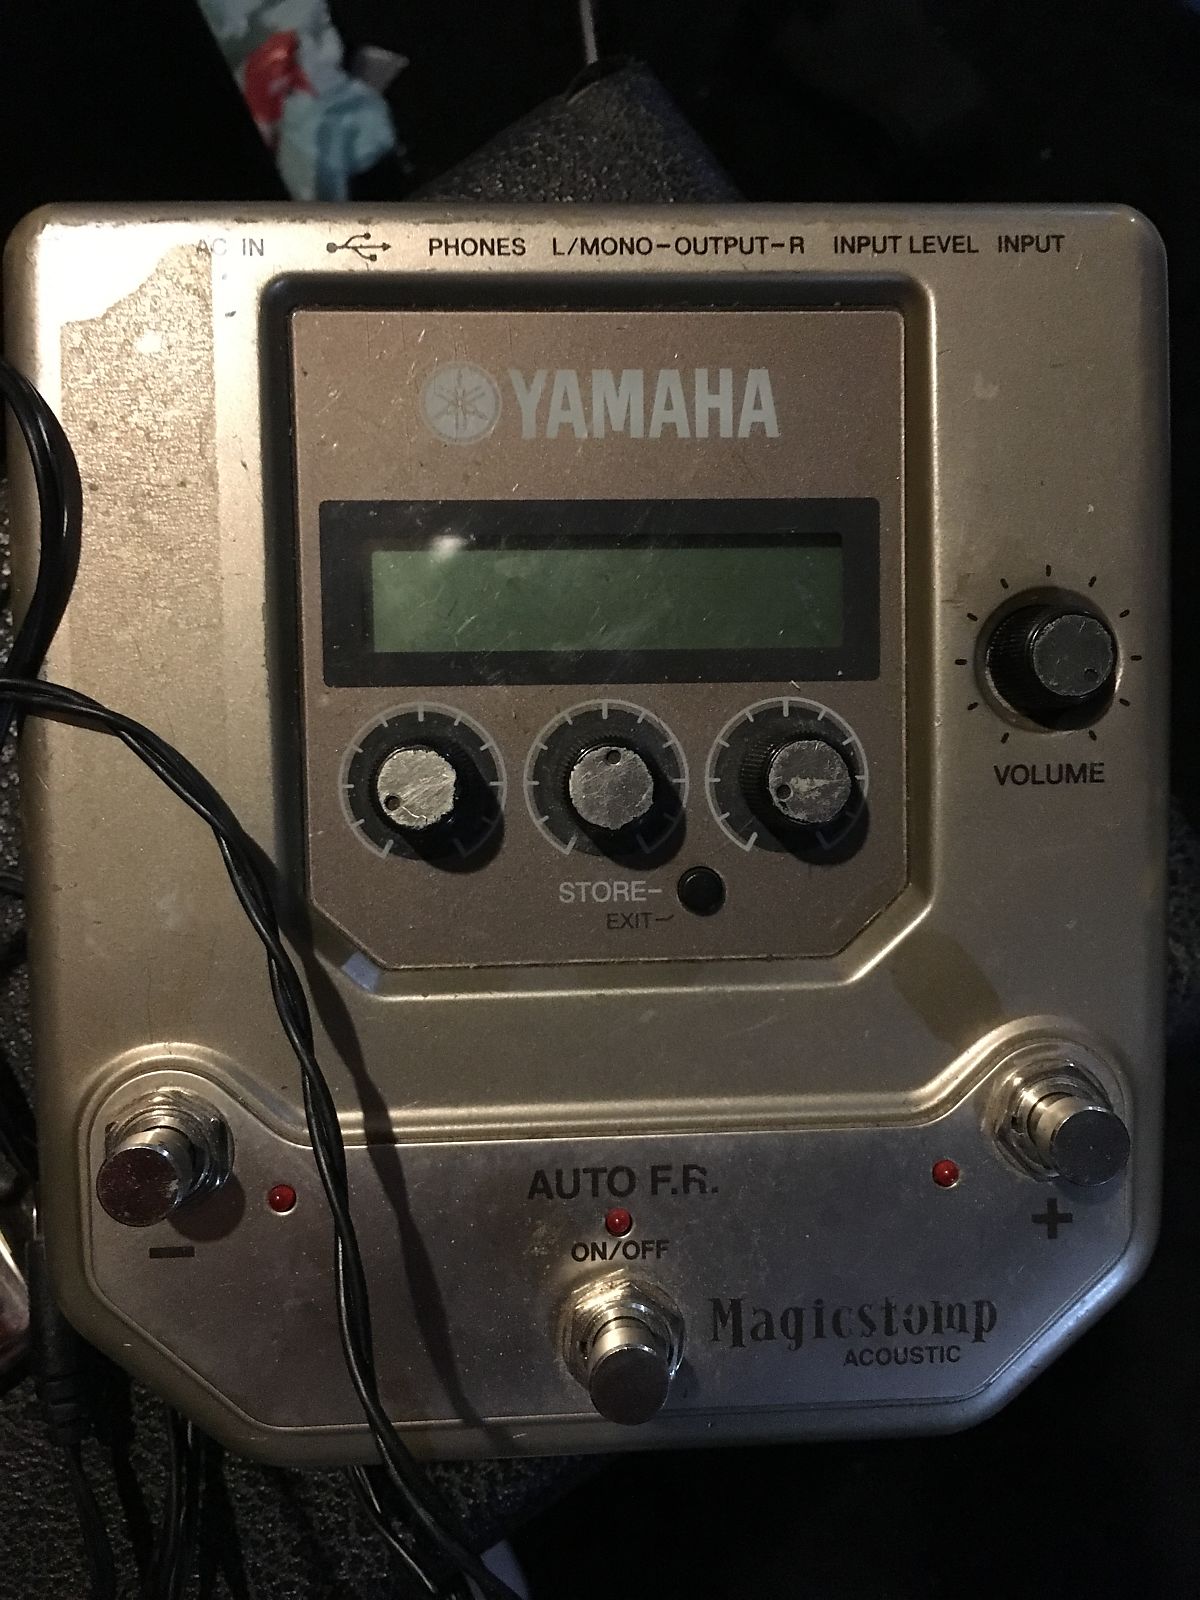 Yamaha MagicStomp Acoustic Stereo Multi-Effect Pedal | Reverb